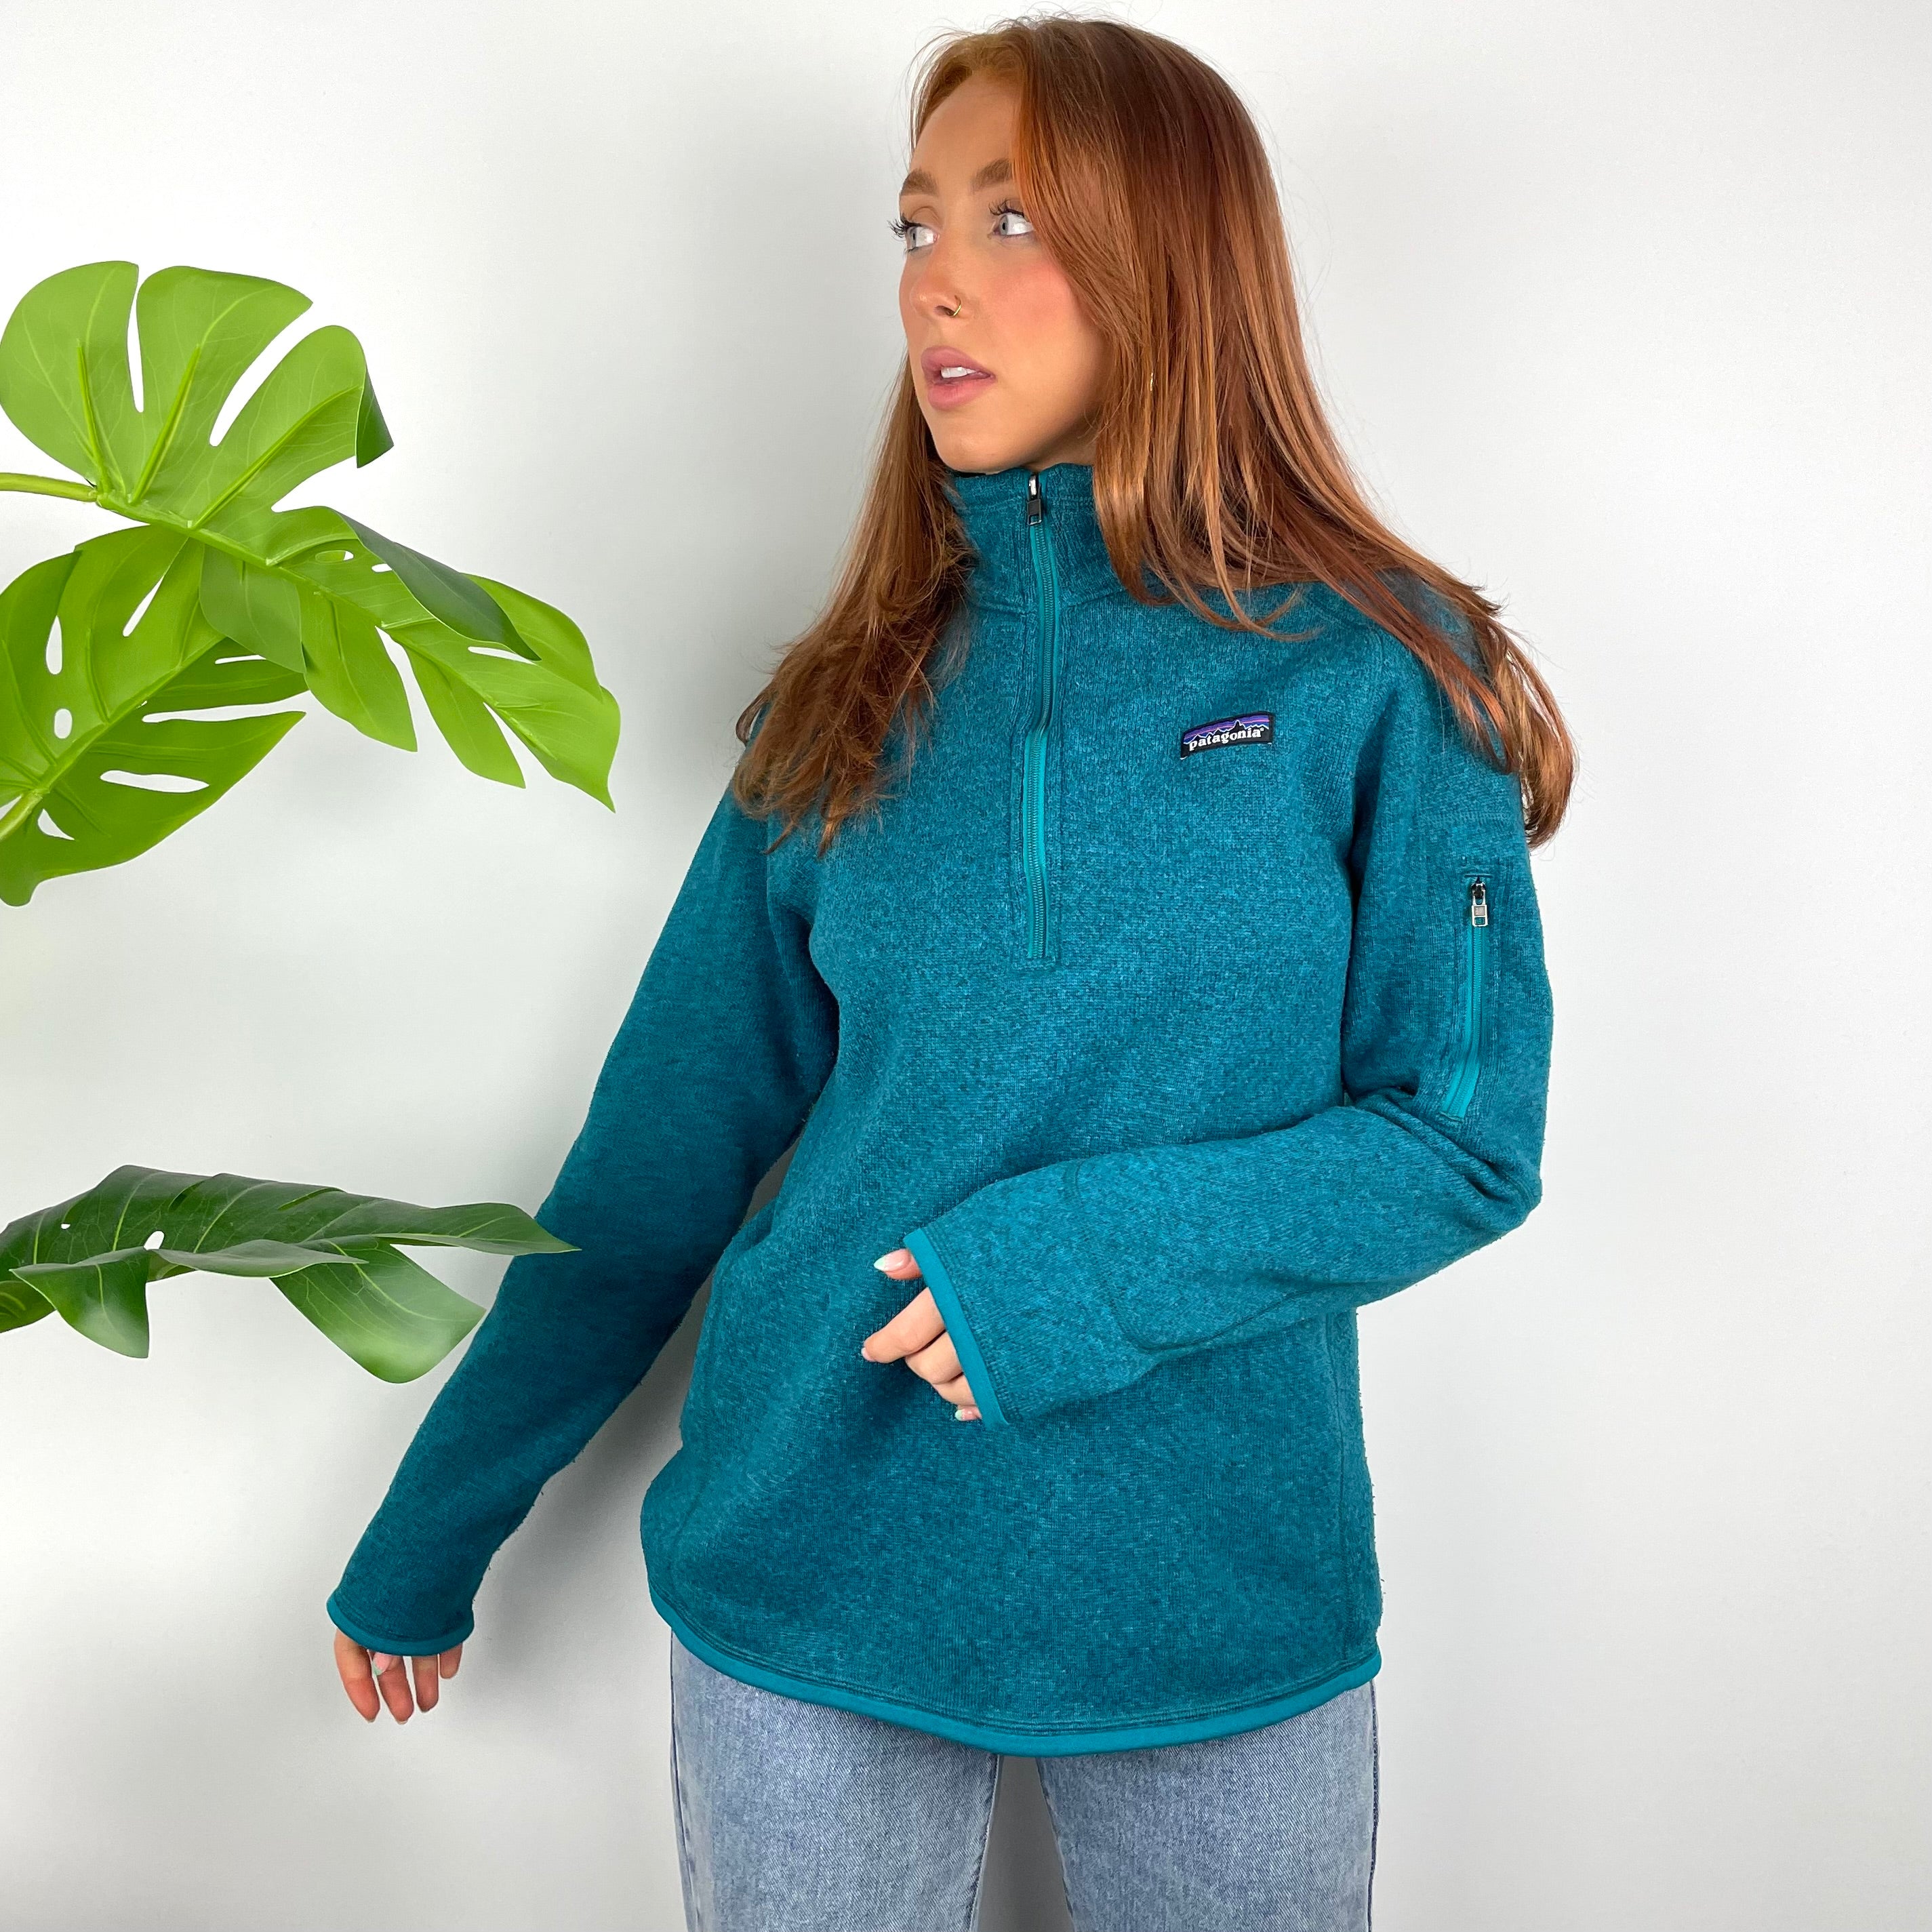 Patagonia RARE Turquoise Blue Embroidered Spell Out Quarter Zip Sweatshirt (L)